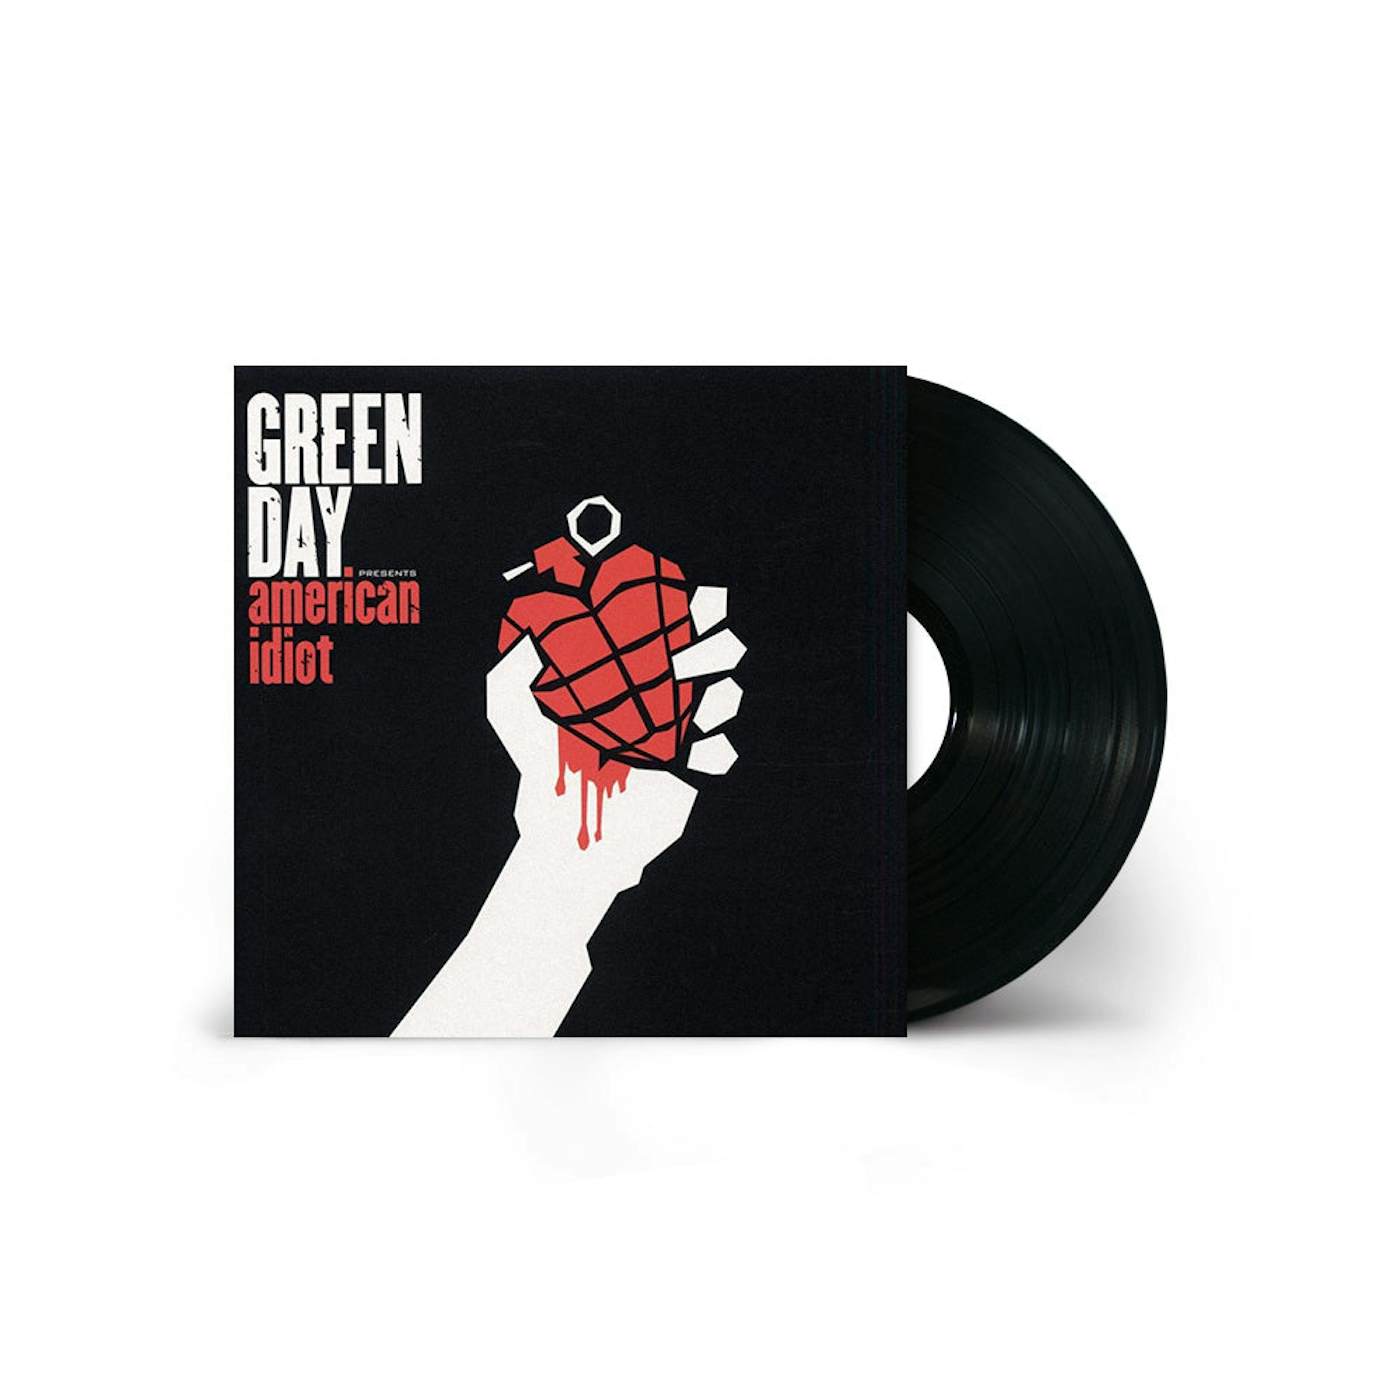 Green Day Release Limited-Edition Vinyl of 1994 BBC Radio Performance